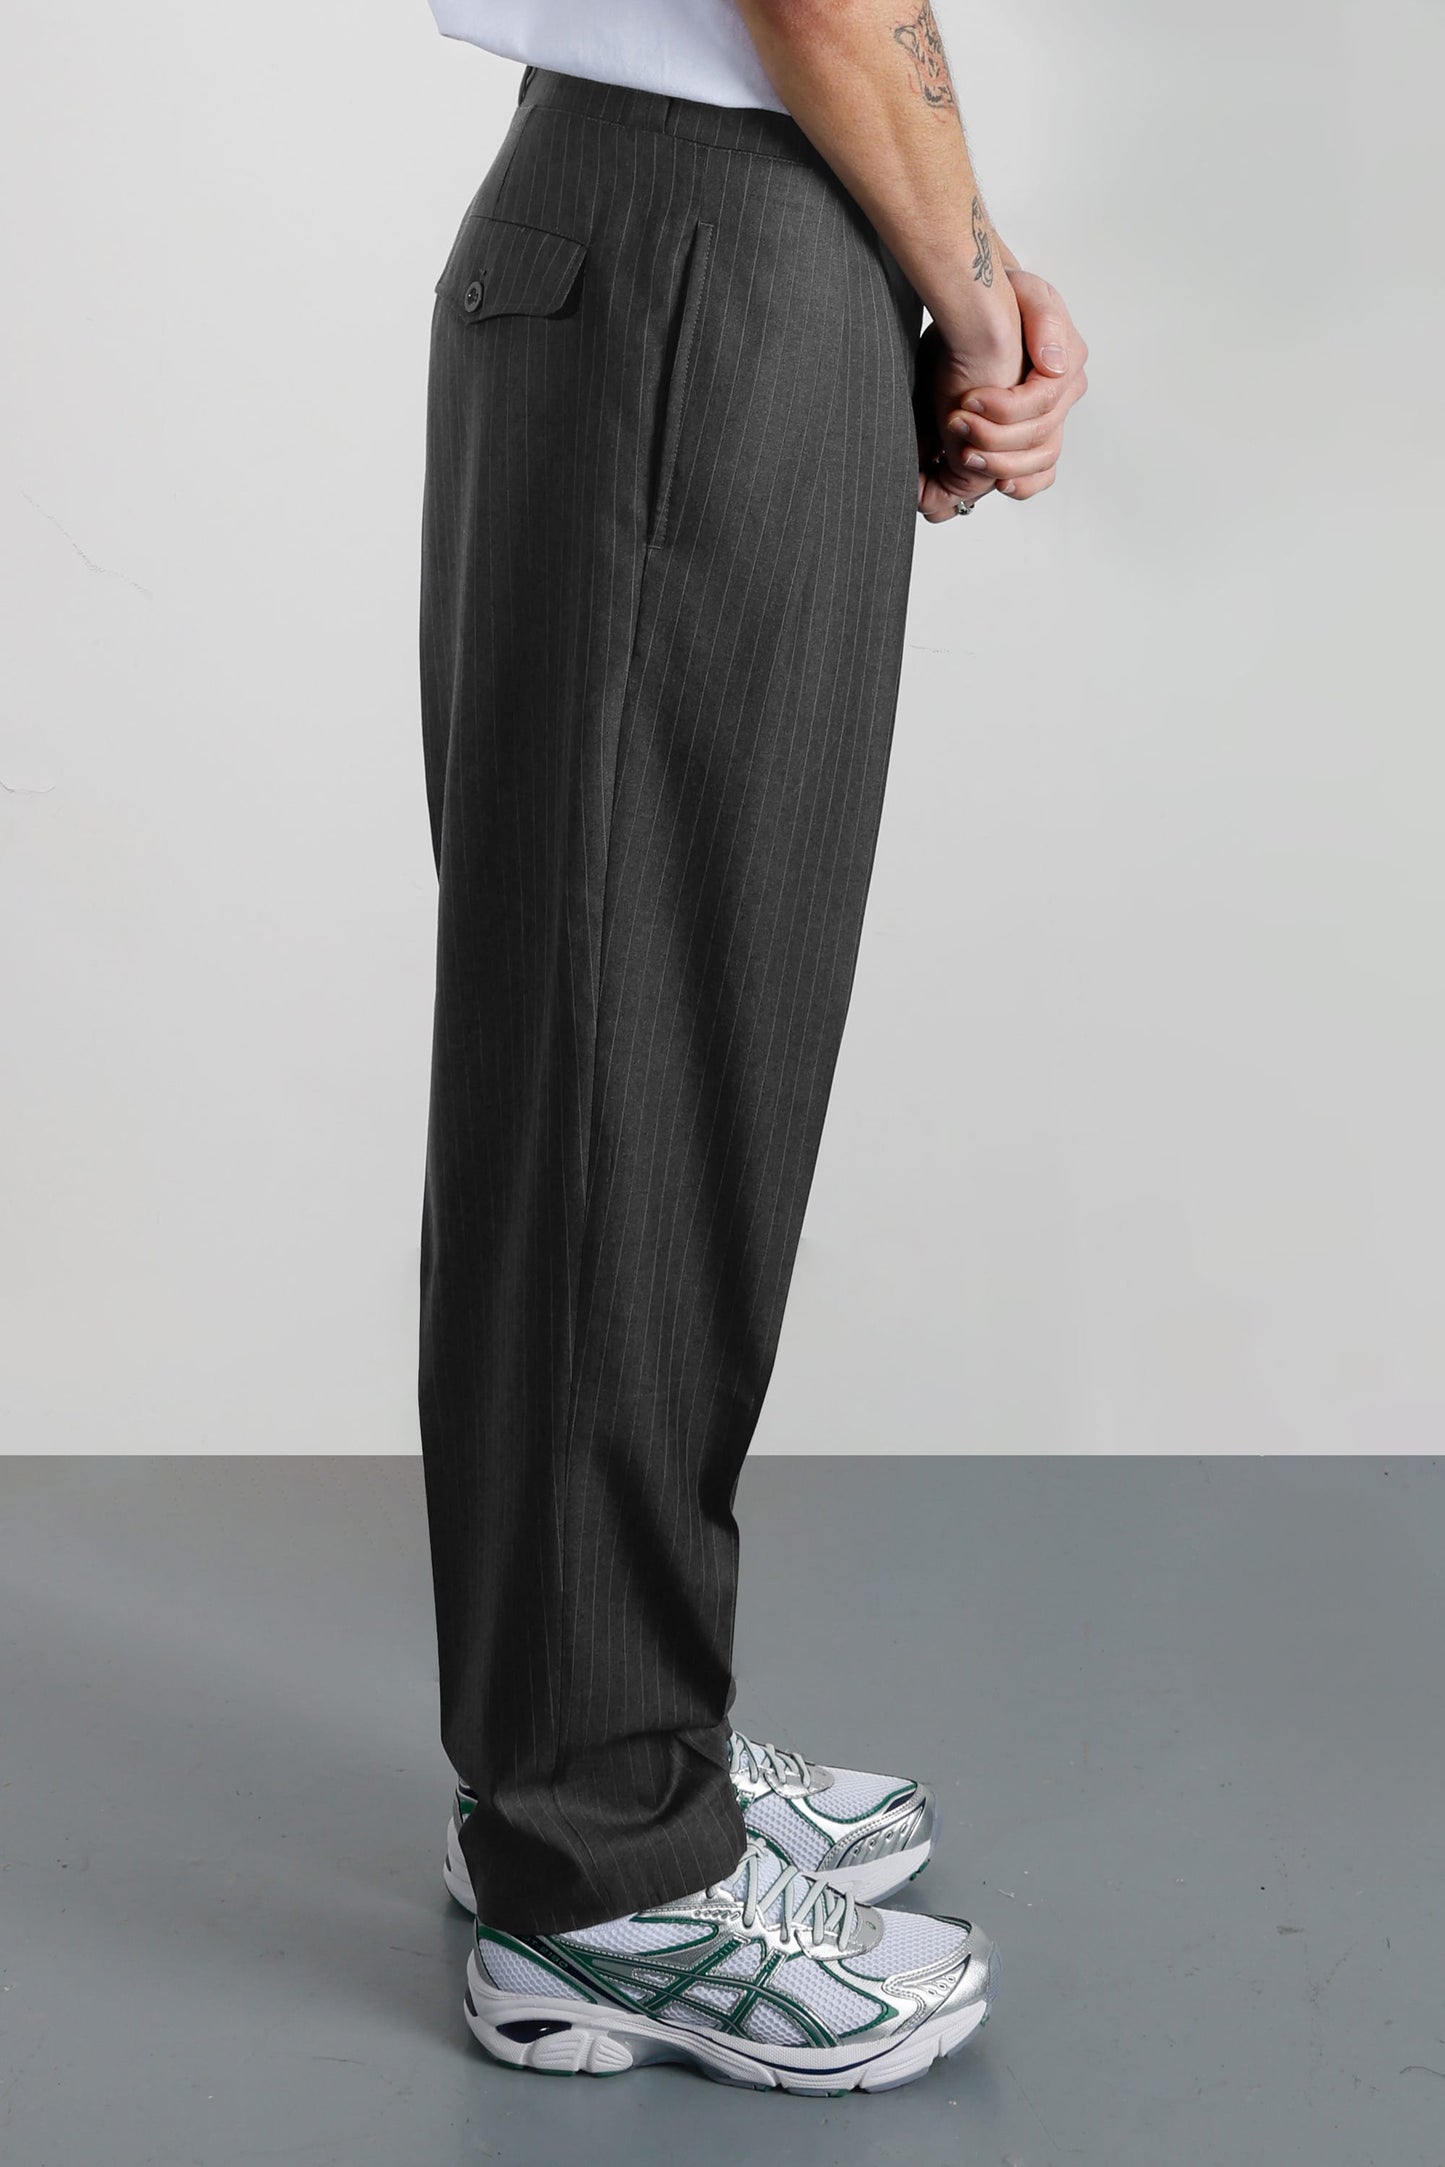 French Military Pants - Gray pinstripe Wool